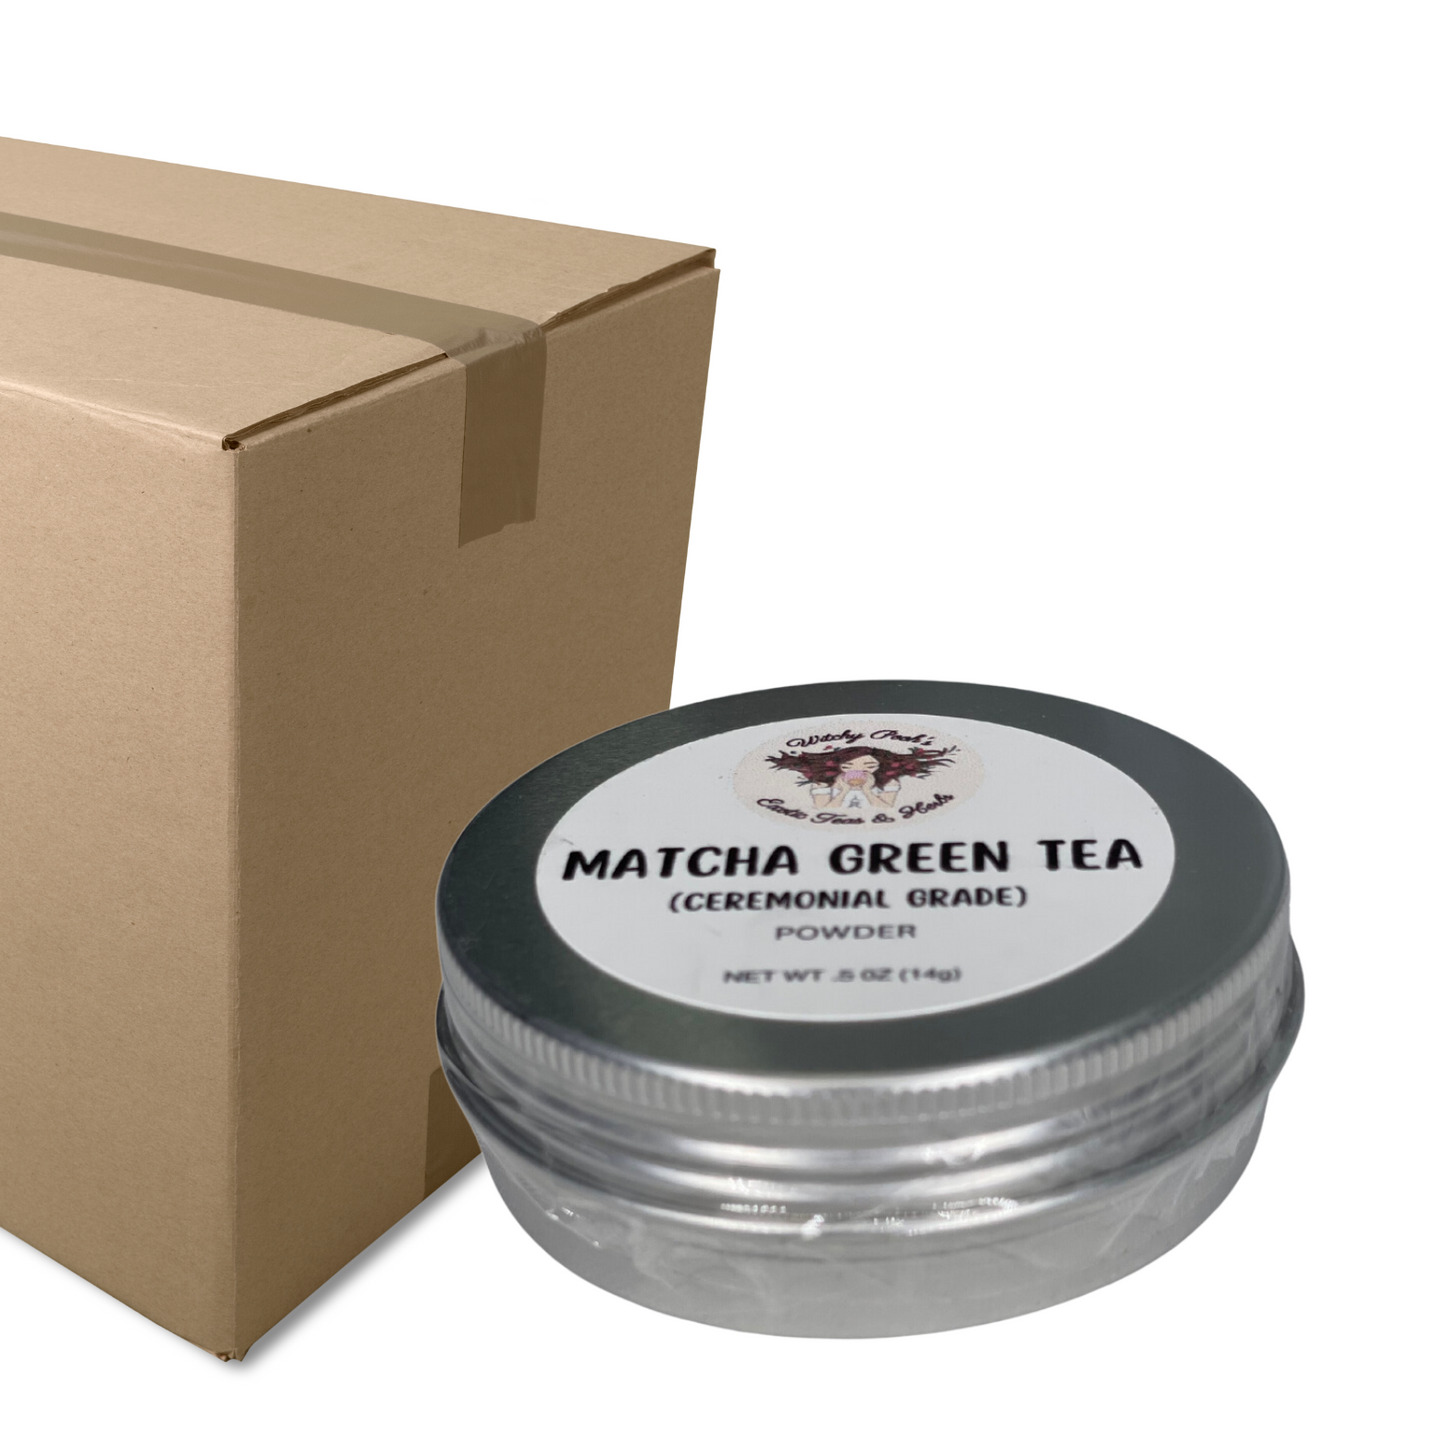 Witchy Pooh's Matcha Green Tea Powder, Ceremonial Grade, High Quality, Vibrate Green Color